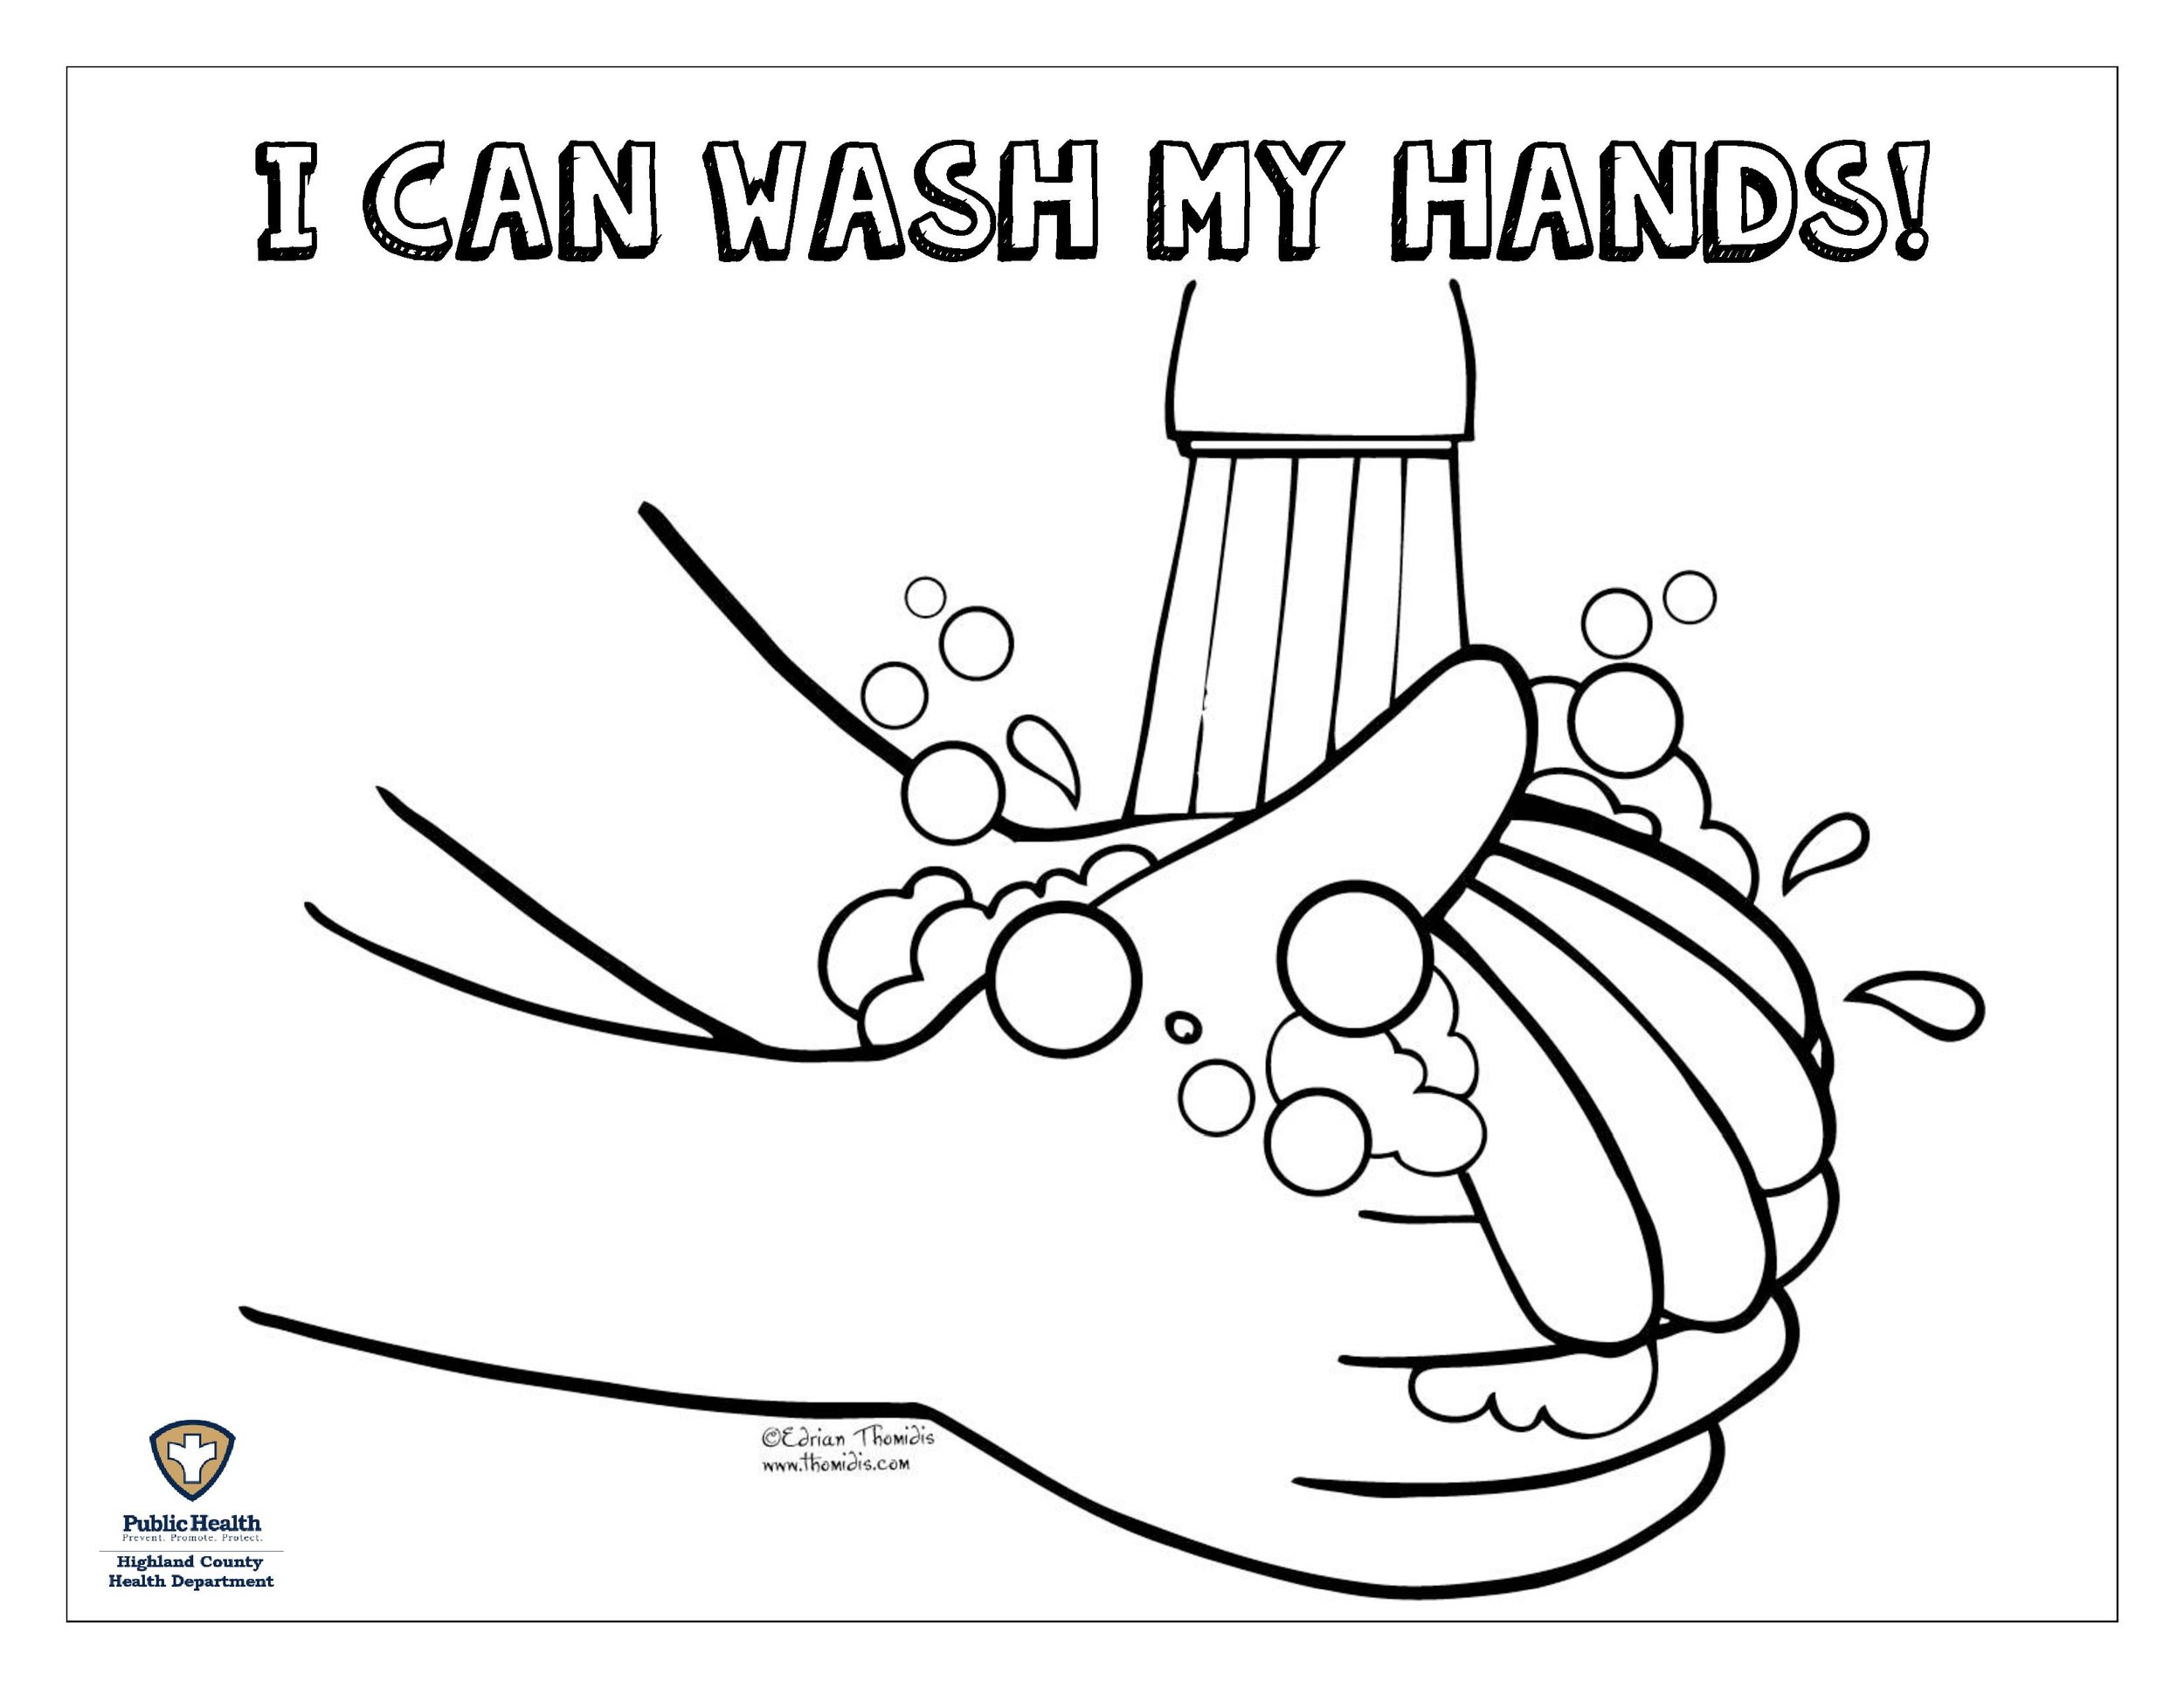 Hand Washing Coloring Page.docx-page-001.jpg